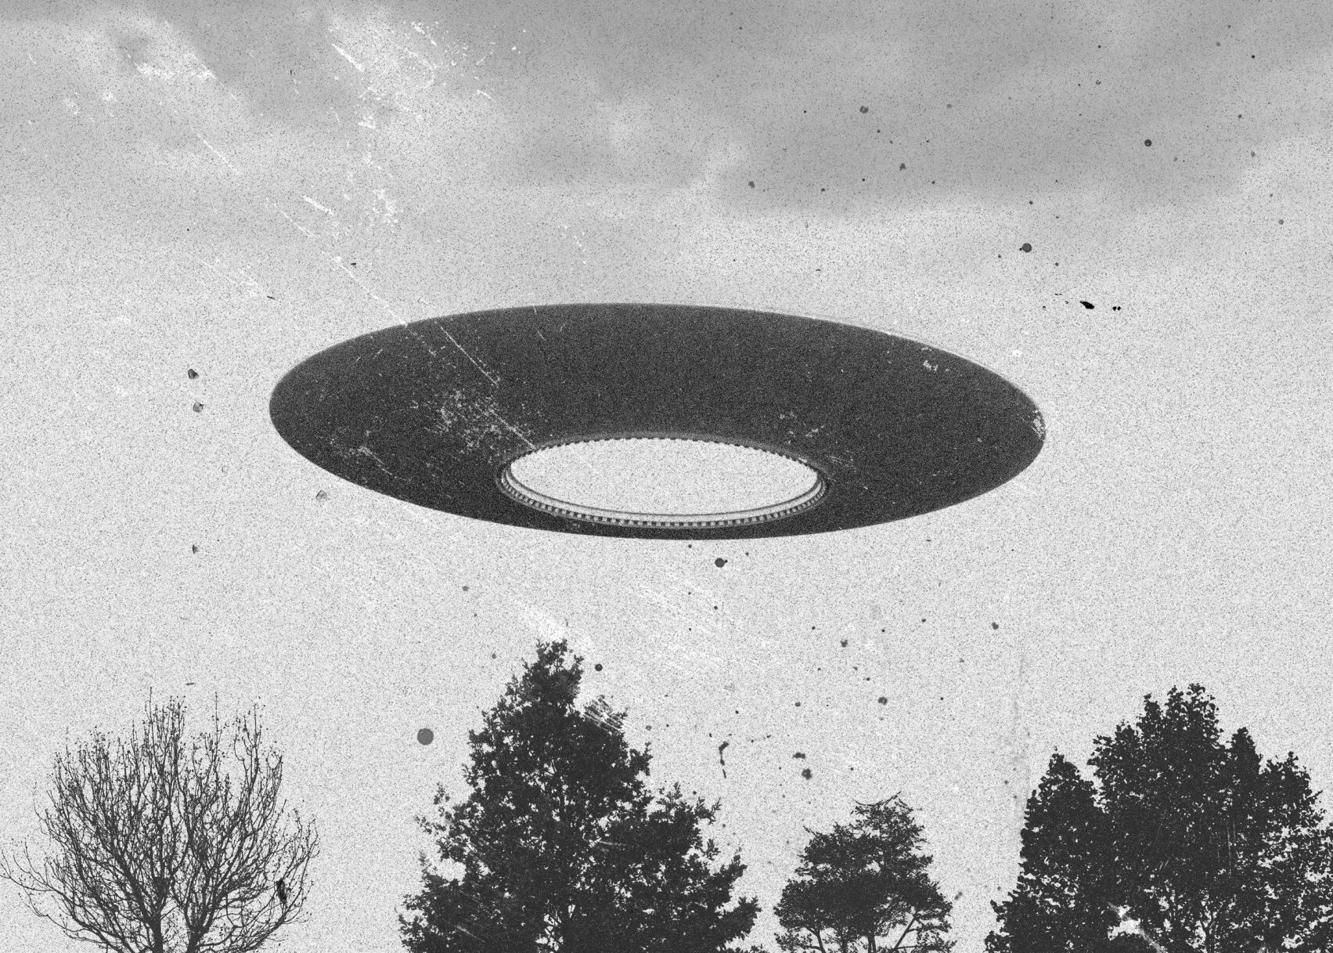 Commentary: The UFO report won't change minds, but maybe it should ...